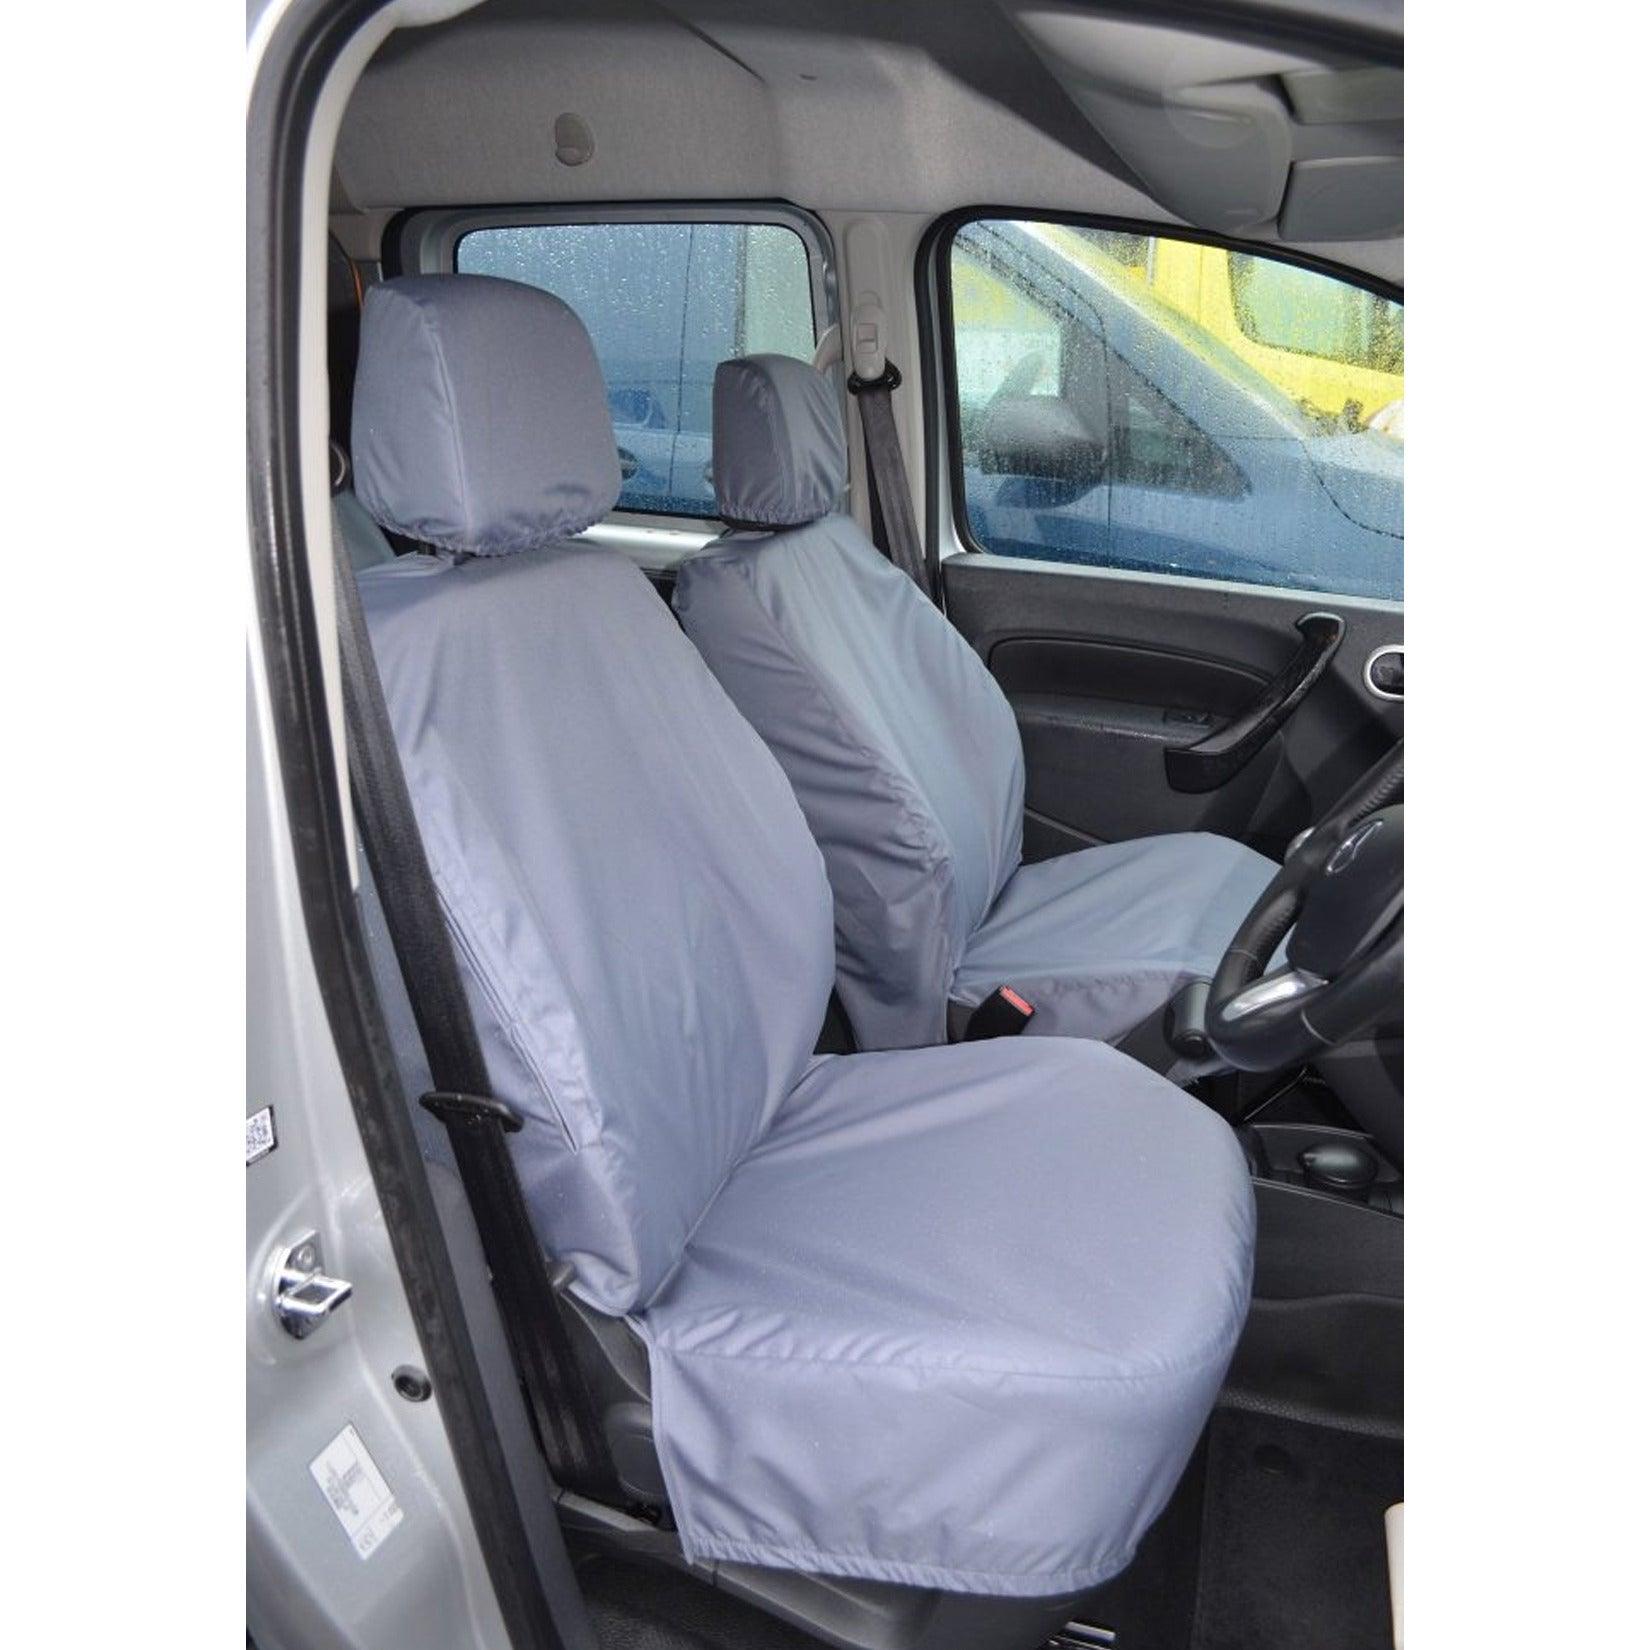 RENAULT KANGOO 2008 ON DRIVER AND NON-FOLDING PASSENGER SEAT COVERS - PAIR - GREY - Storm Xccessories2